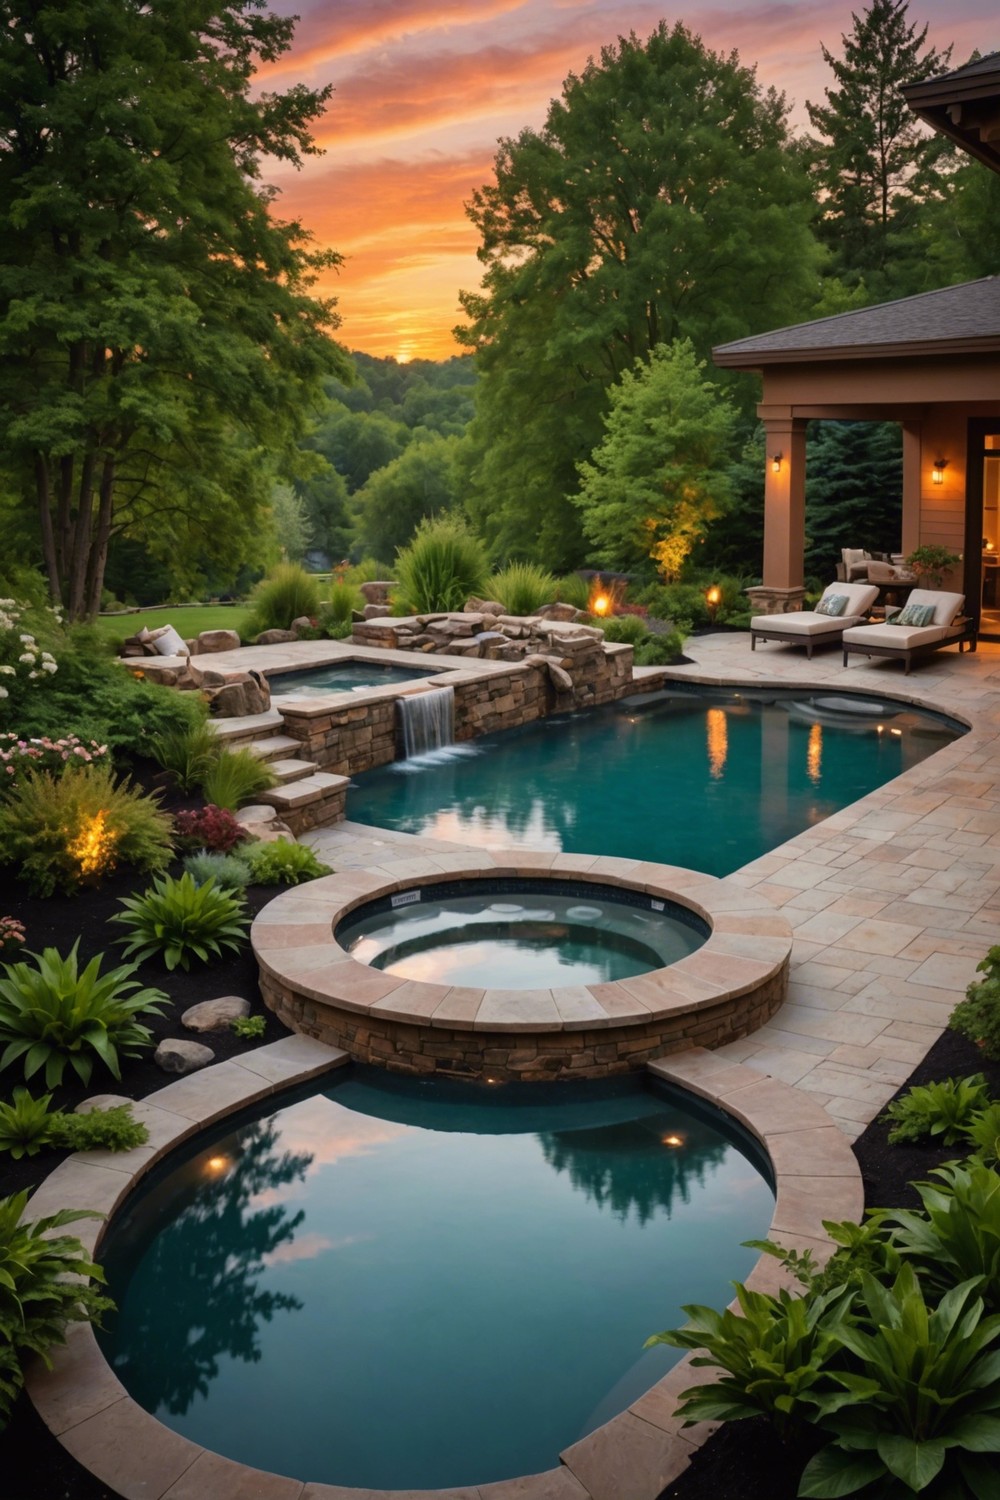 Raised Pool with Infinity Edge and Hot Tub